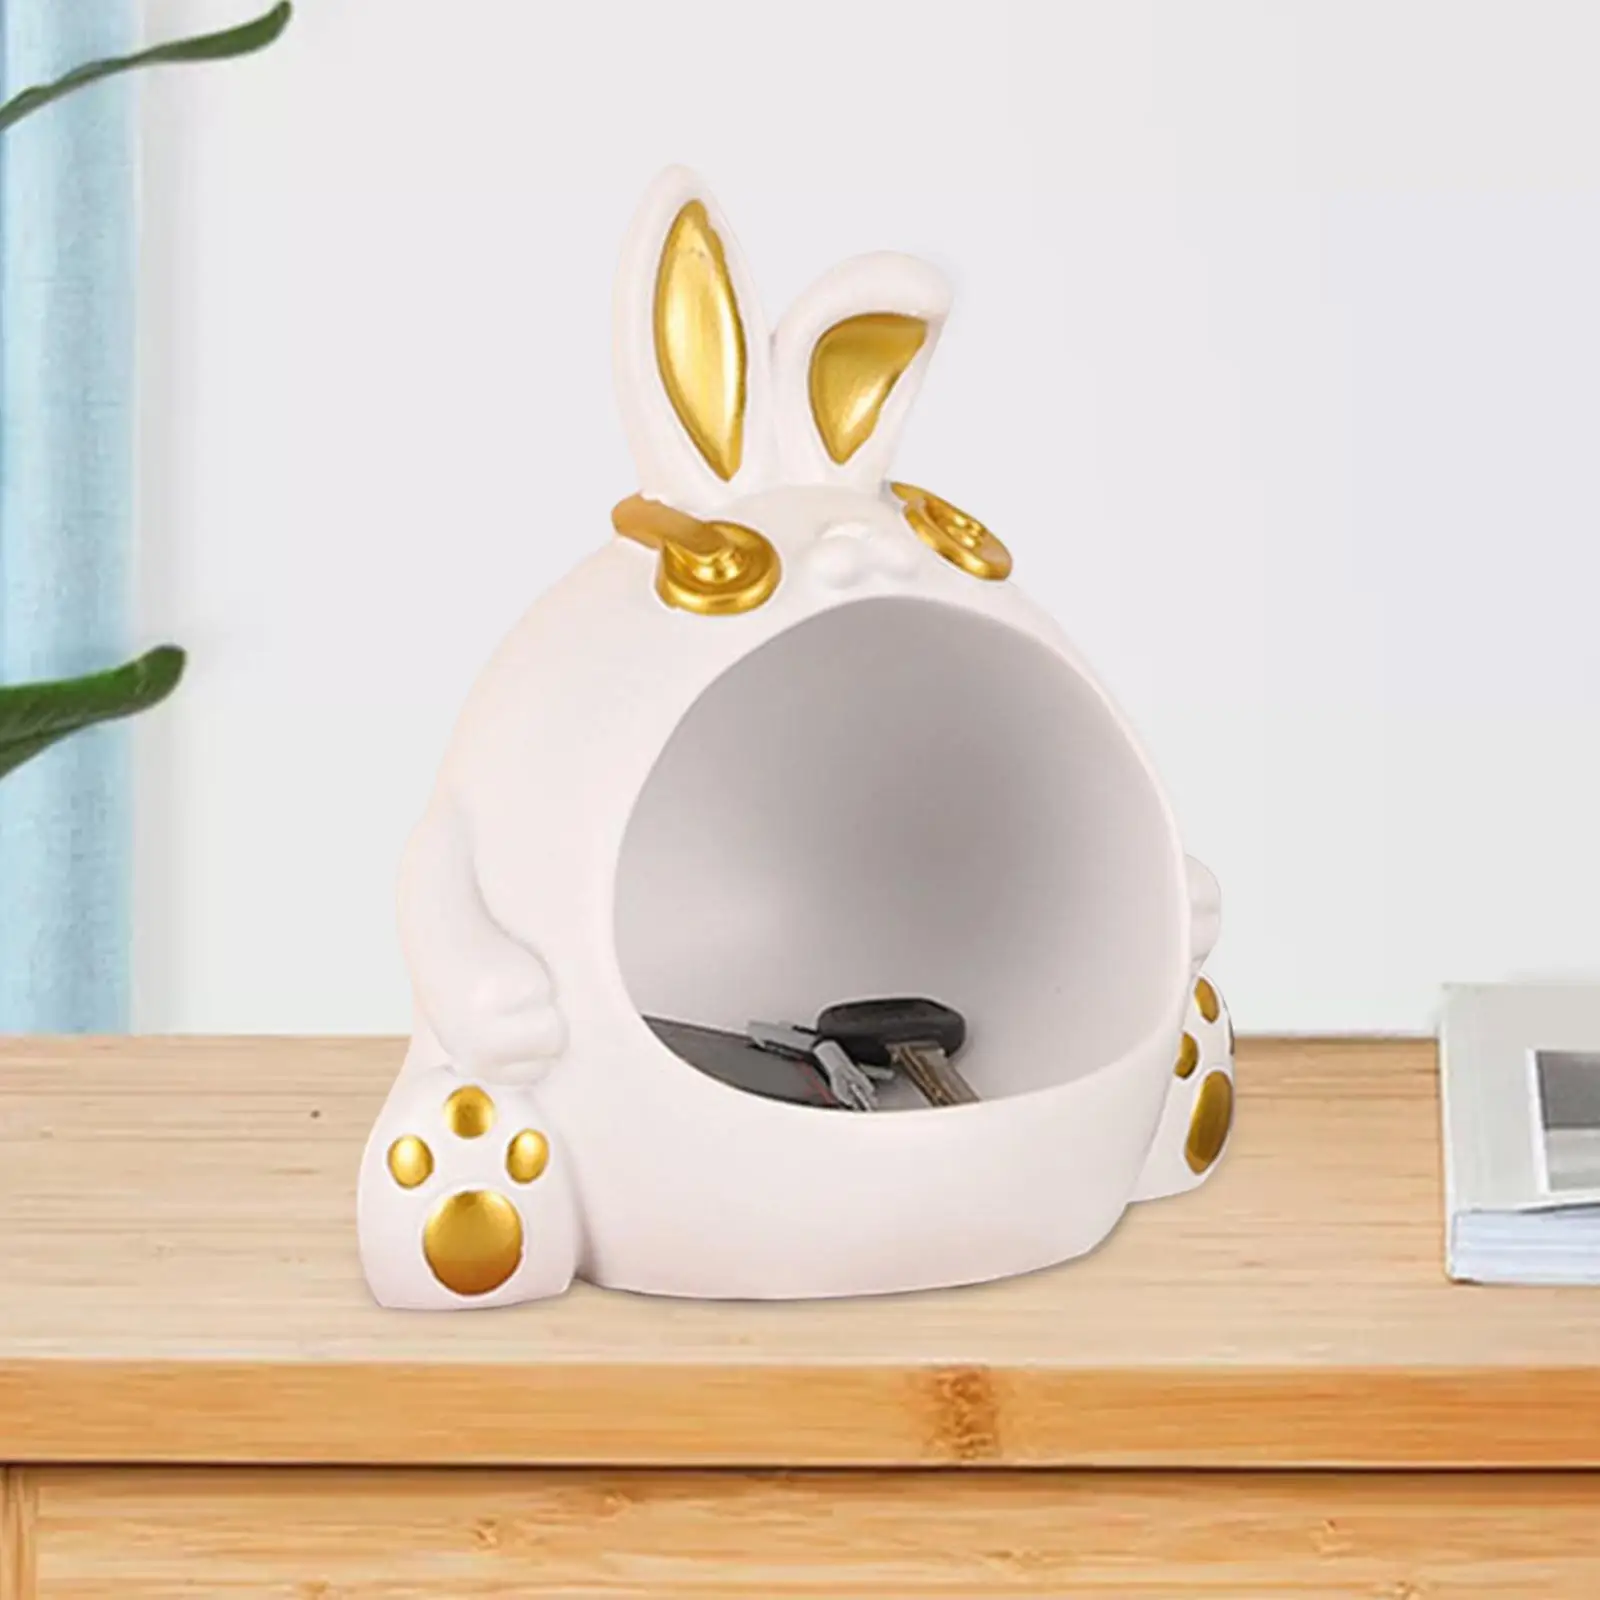 Resin Storage boxes bunny Figurine Cute Animal for Bathroom Crafts Living Room Home Decor